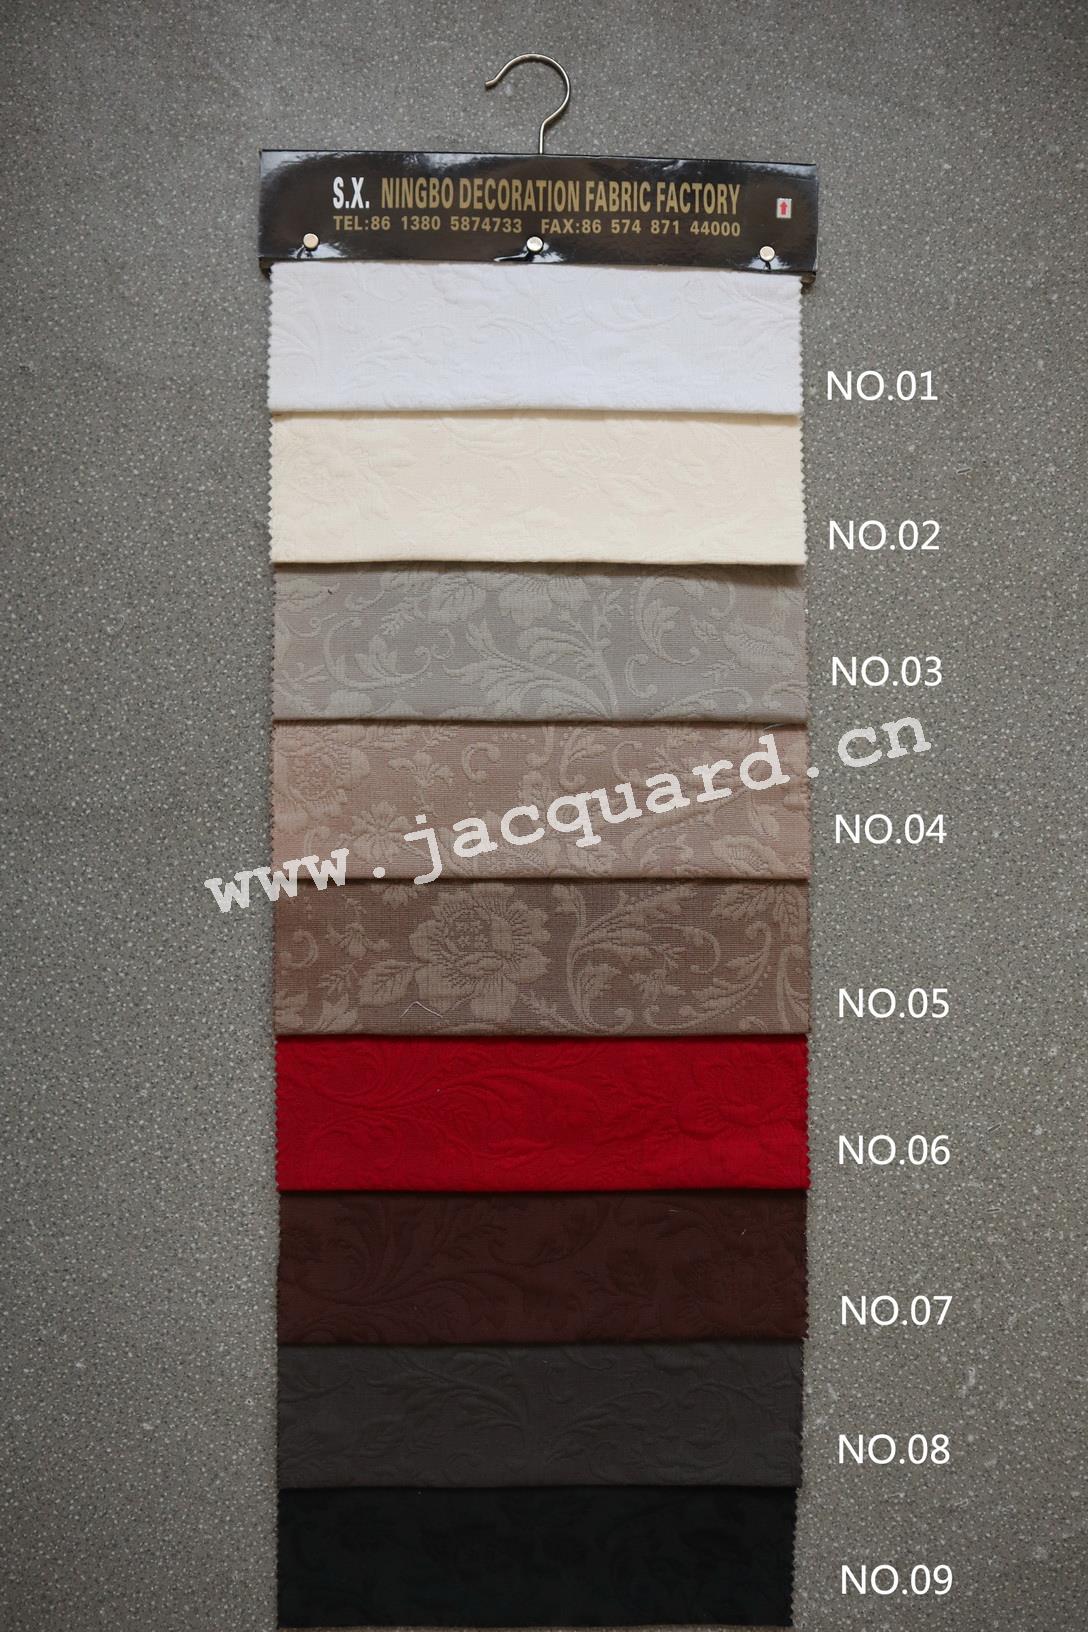 Jacquard Polyester Cotton Bed Cover Bed Spread Thickening Skidproof